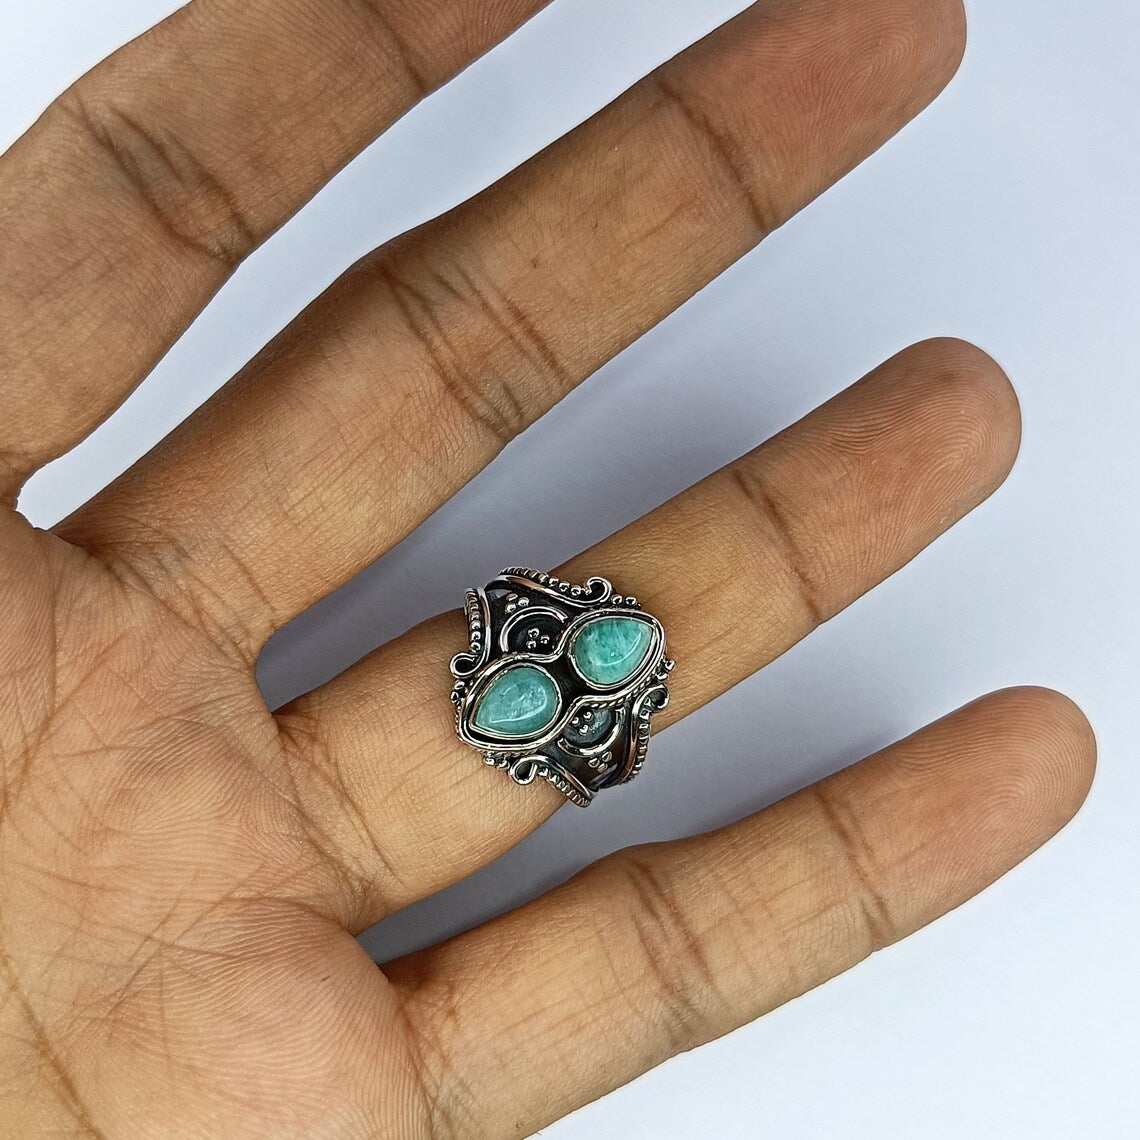 Larimar Ring, 925 Sterling Silver Ring, Blue Gemstone Ring, Women Silver Ring, Boho Ring, Handmade Ring, Promise Ring, Personalized Gifts